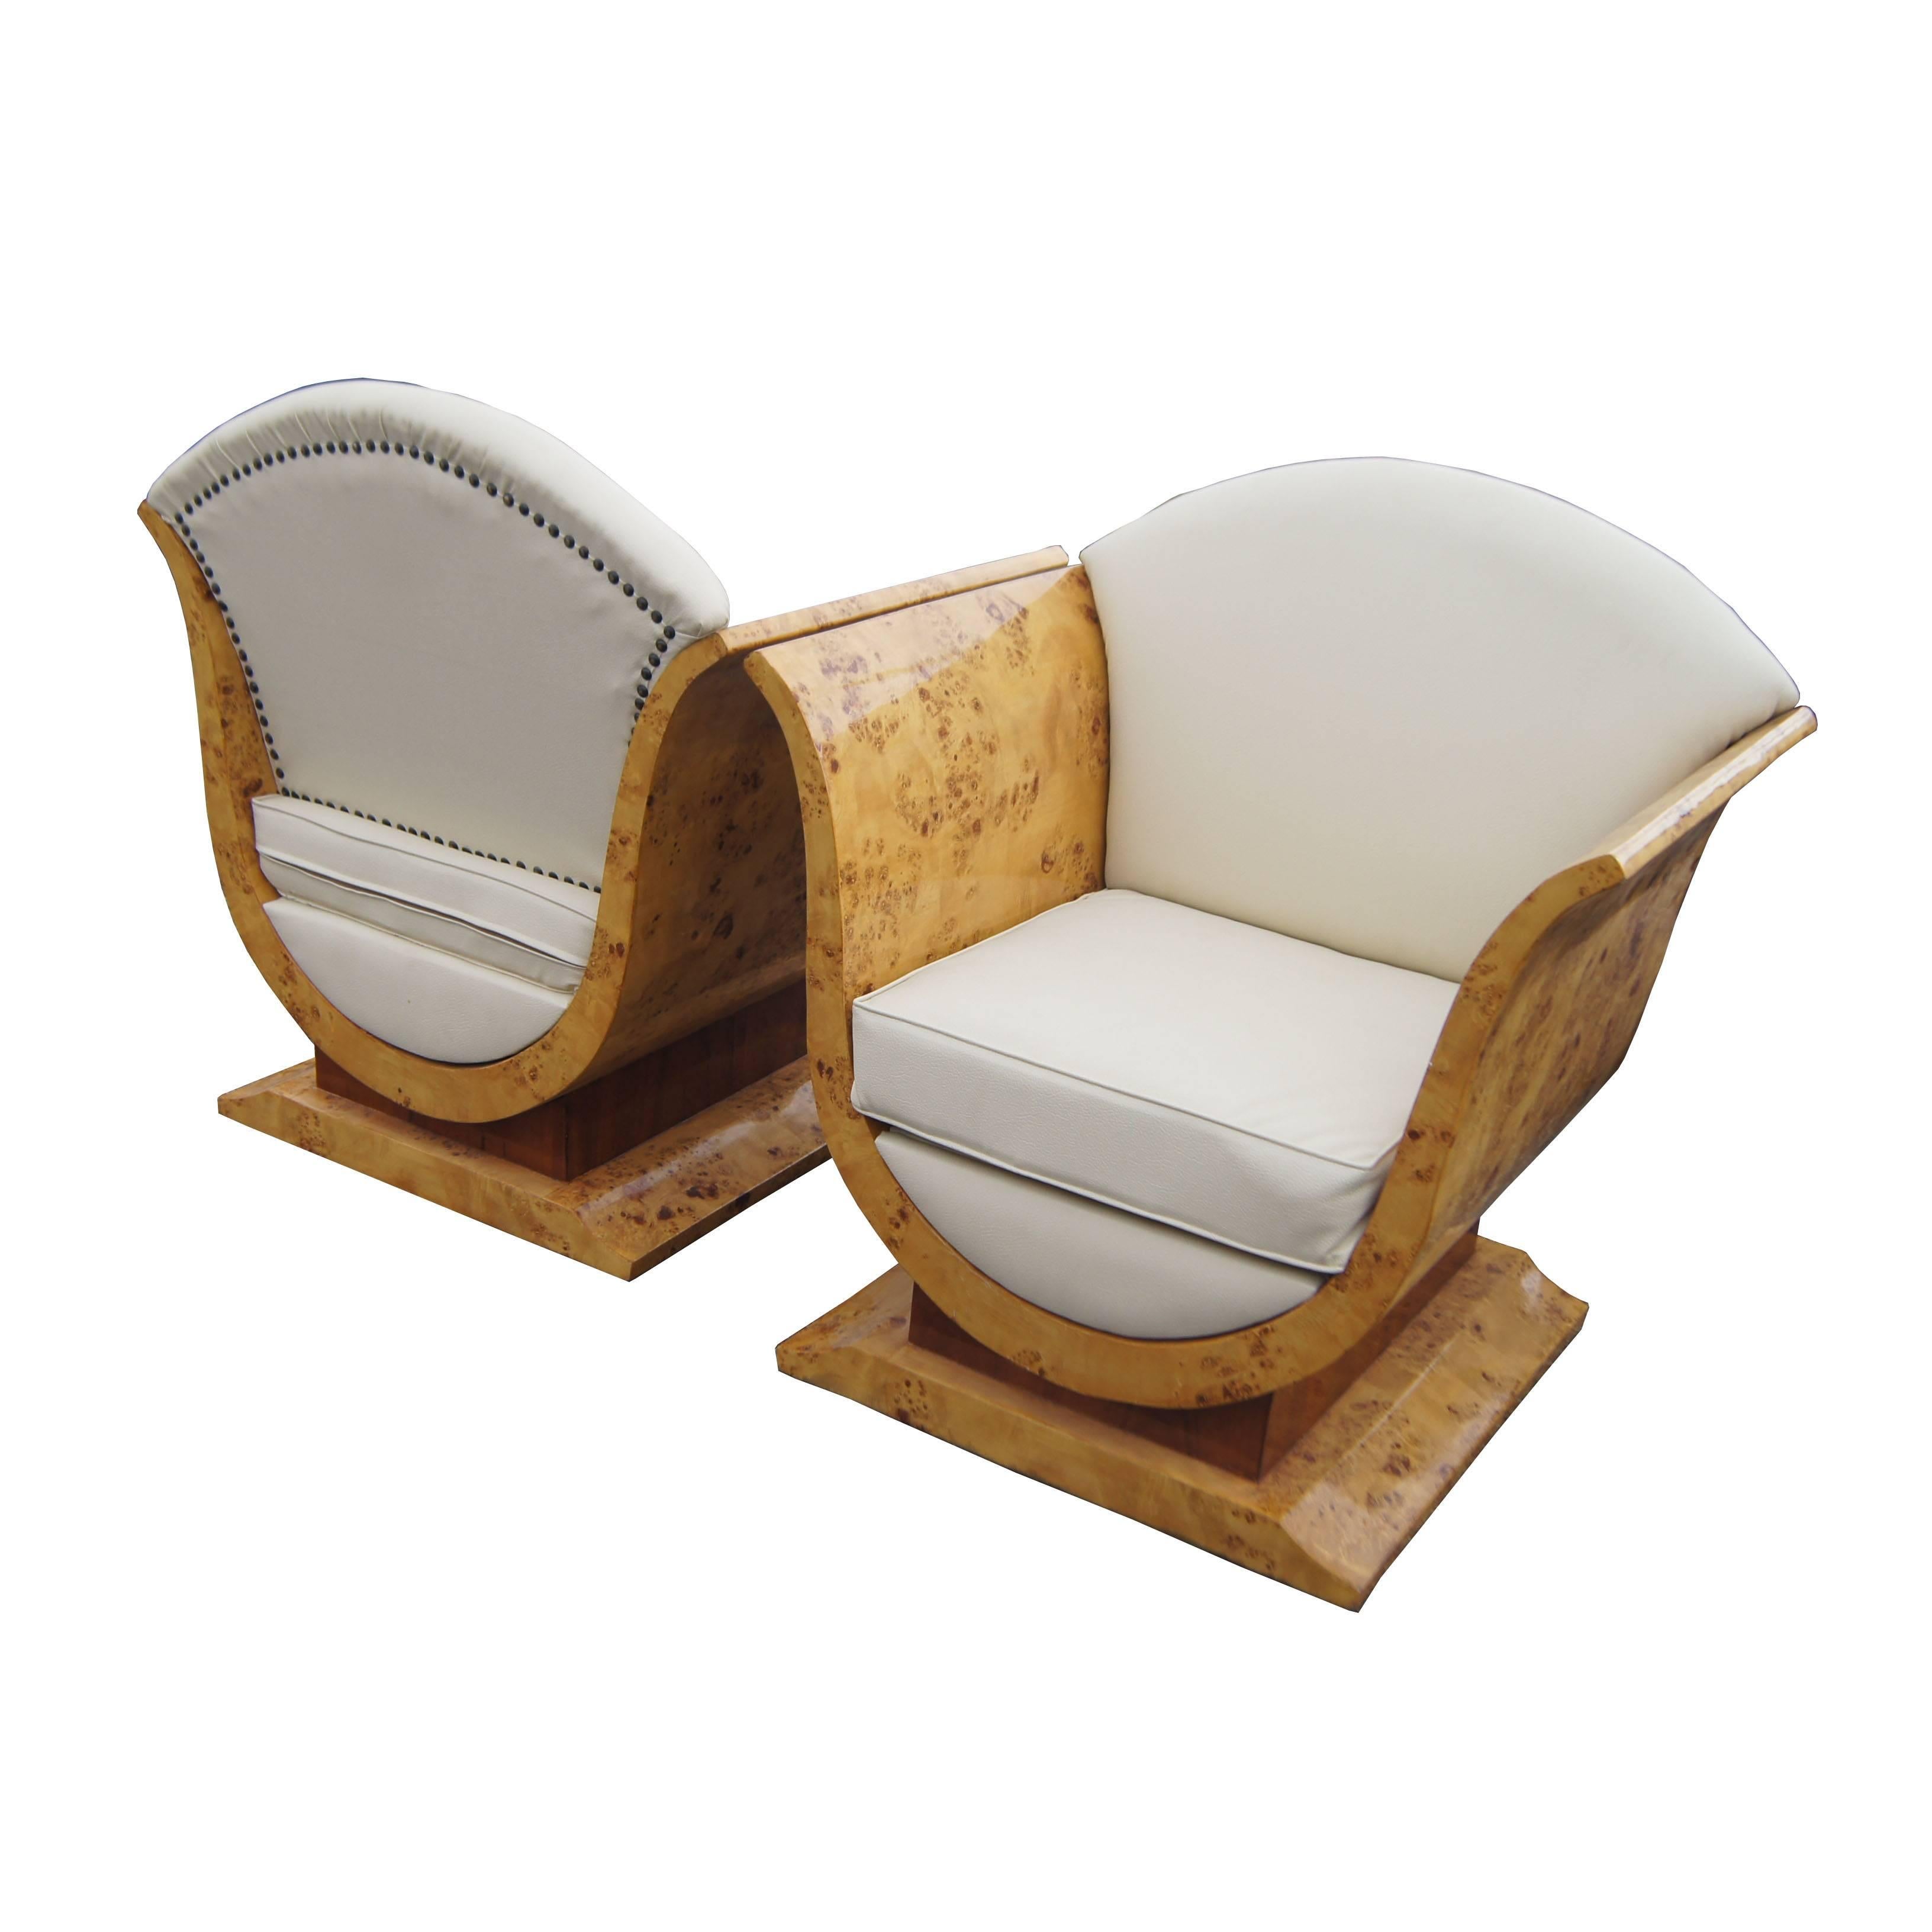 Pair of burled olive wood French Art Deco Style lounge chairs. Features a beautiful burled wood pattern and elegant curved lines on the arms as well as a burled square pedestal base.